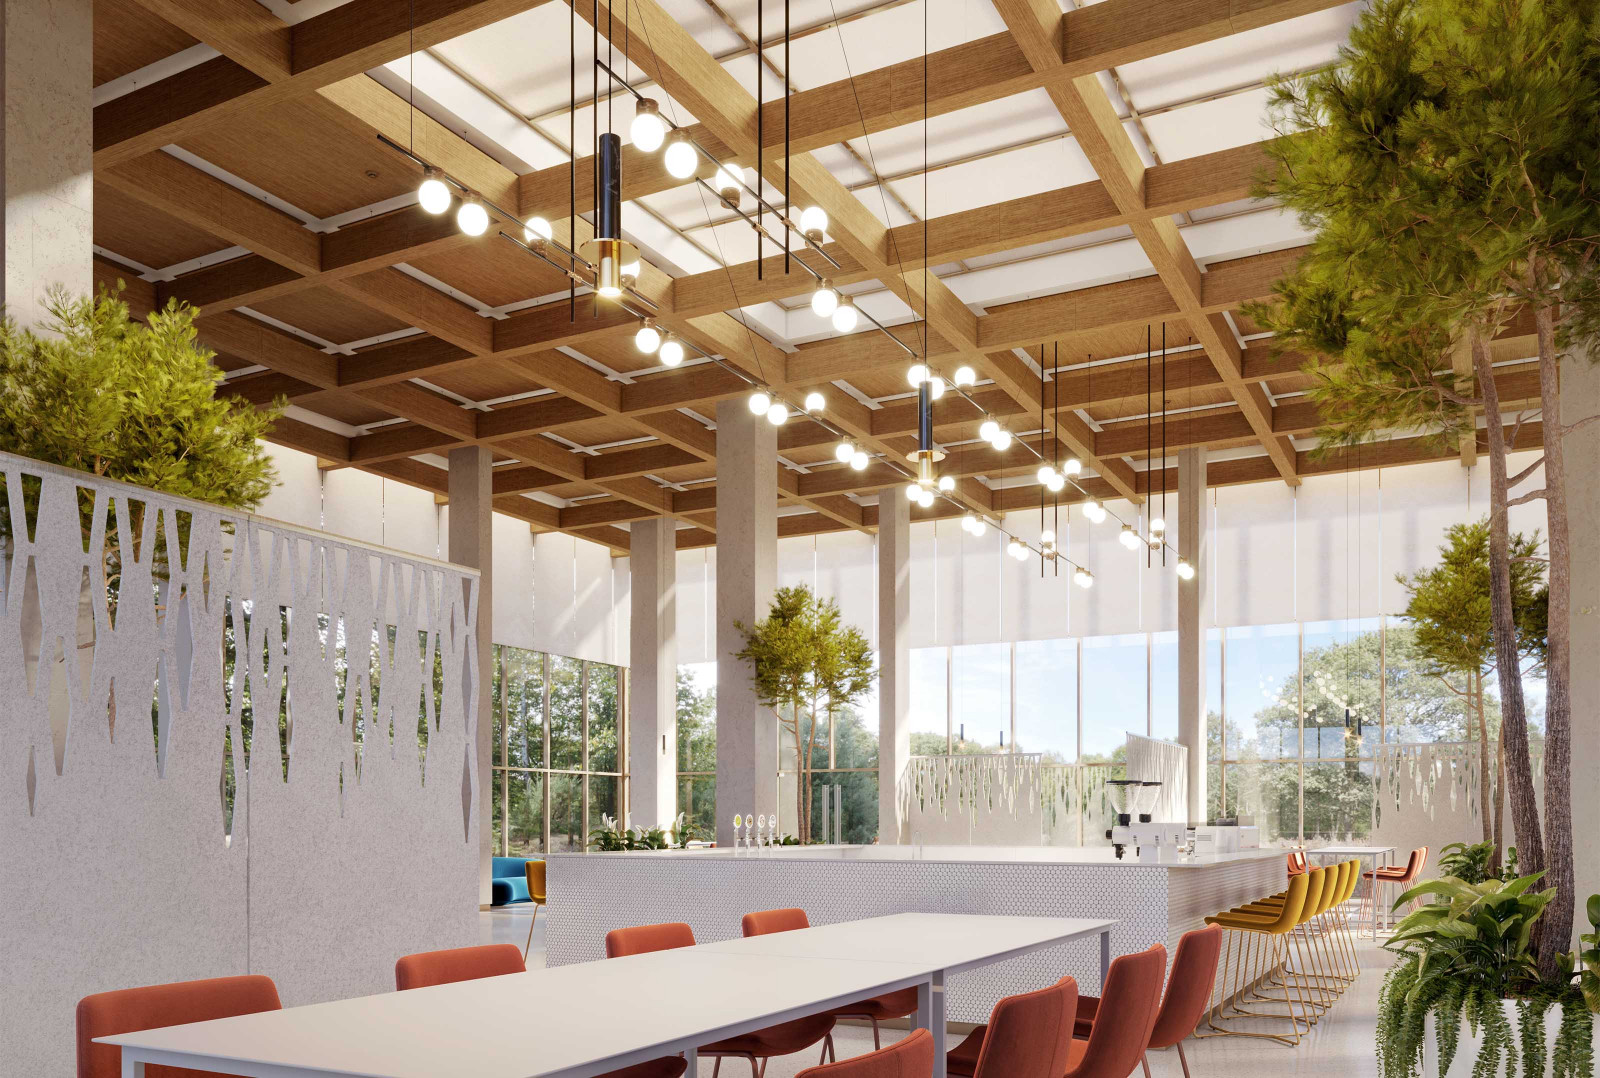 This large space has a long table and a bar area for seating, there are various plants in the space, and the ceiling has large trellis beams. 